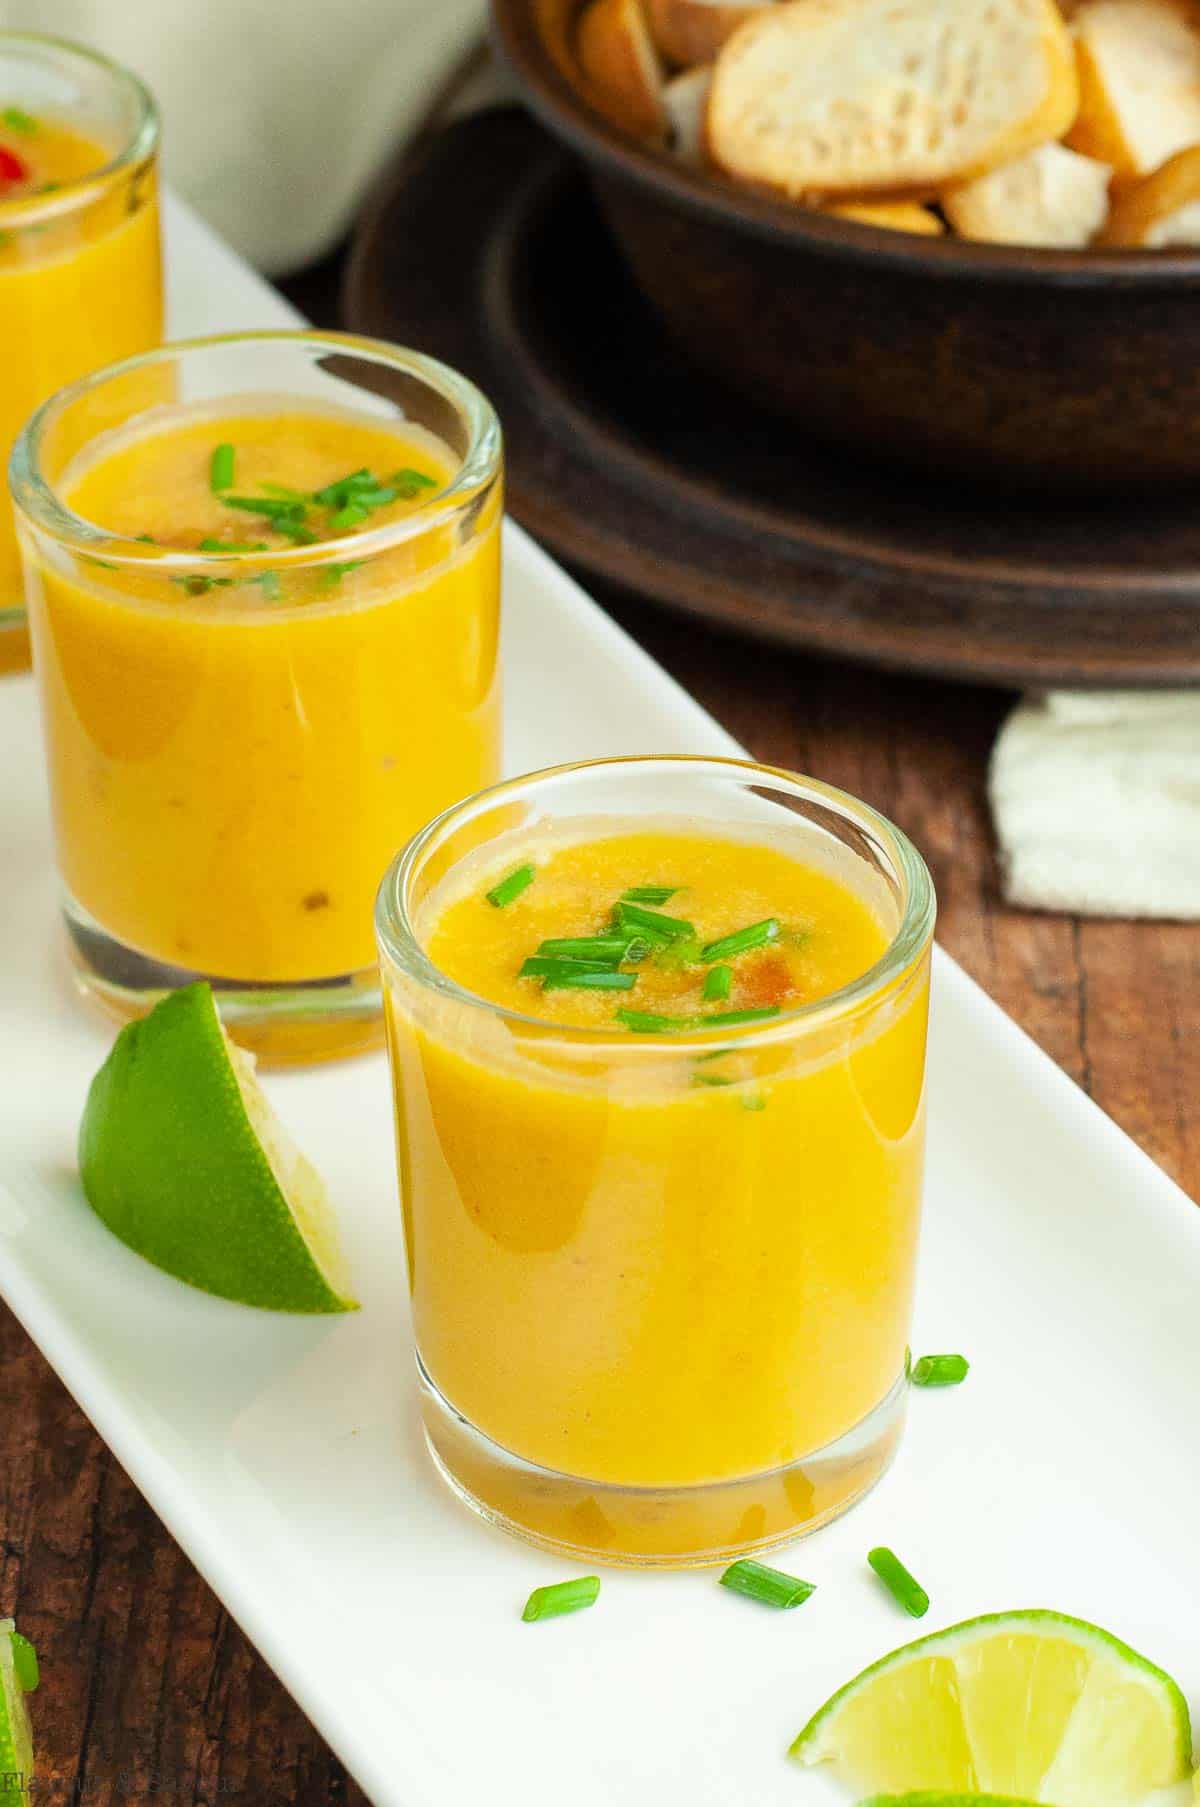 Thai pumpkin curried soup in shot glasses on a white tray.